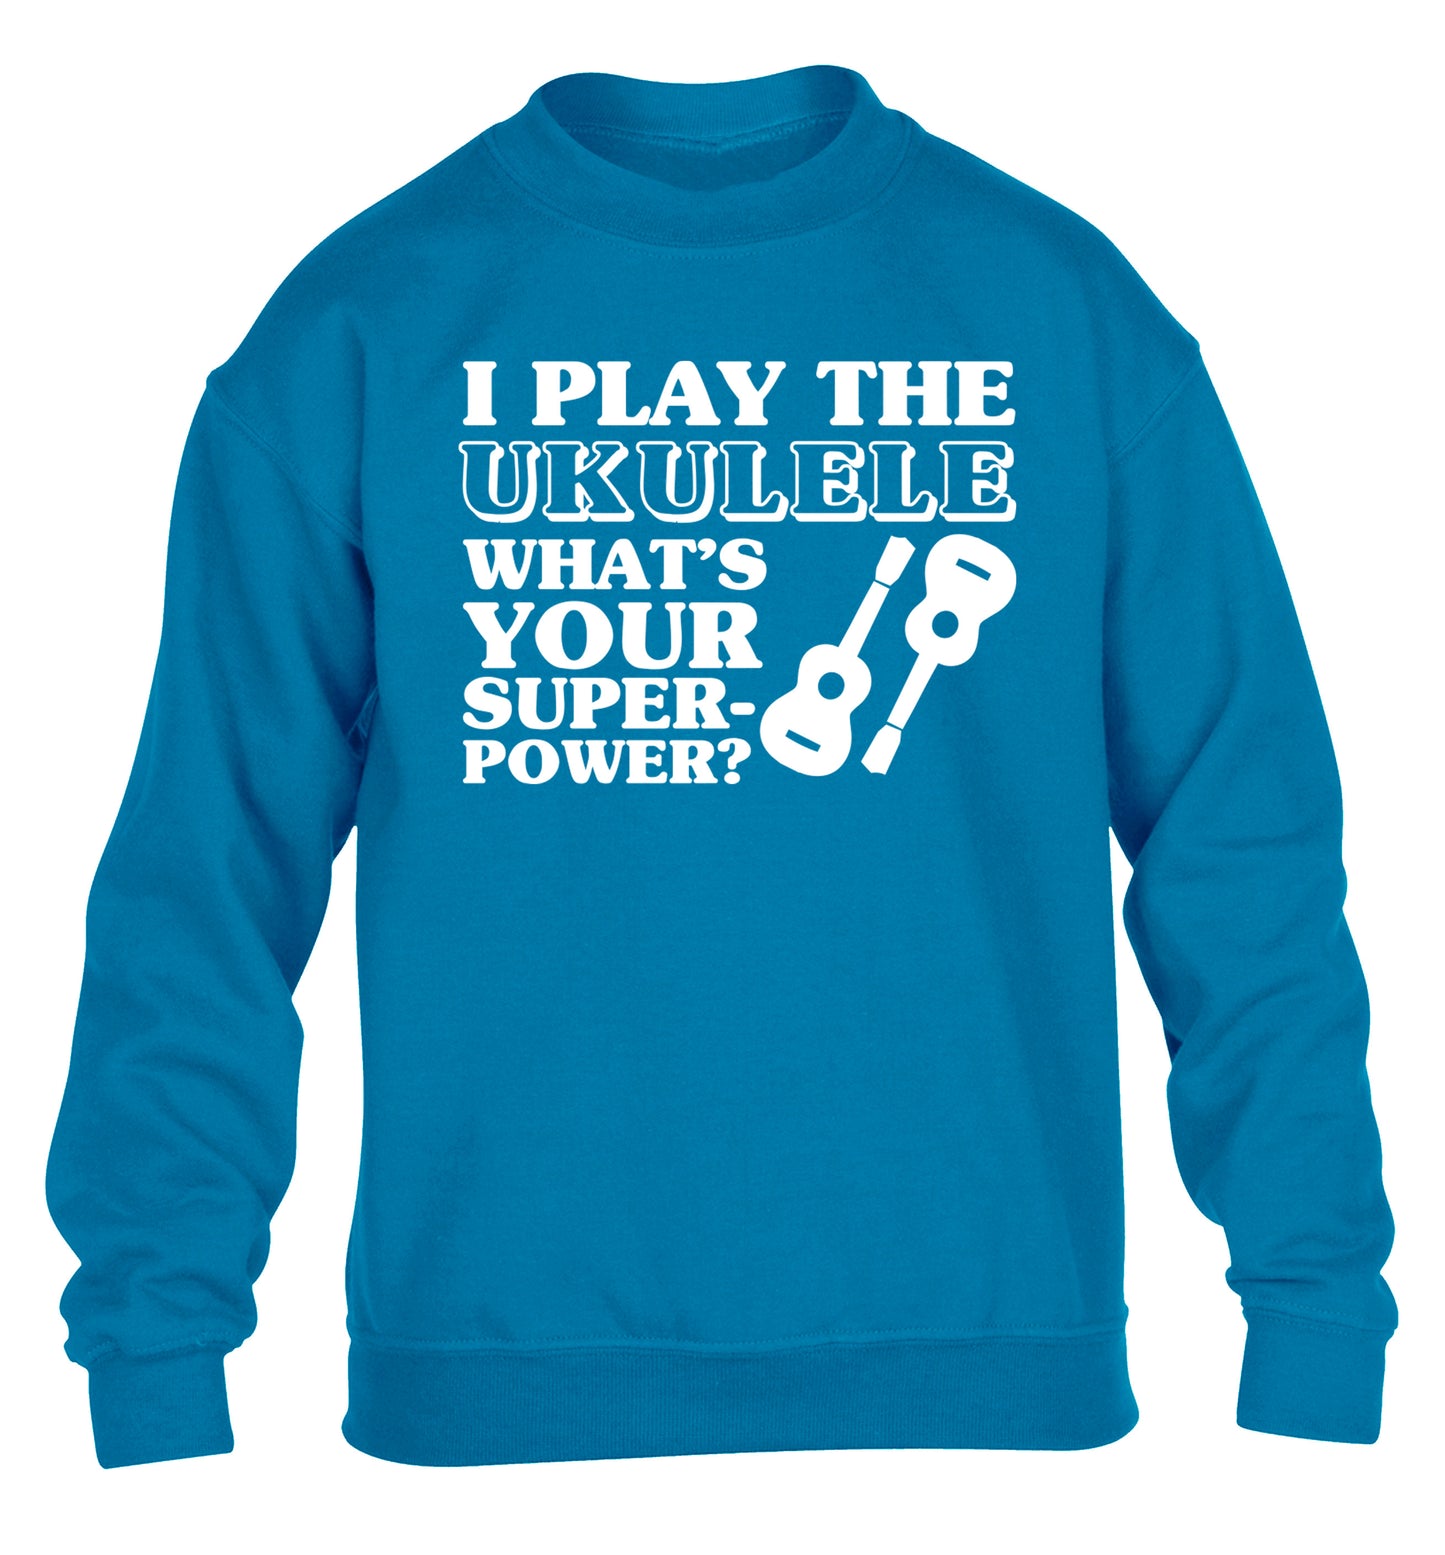 I play the ukulele what's your superpower? children's blue sweater 12-14 Years